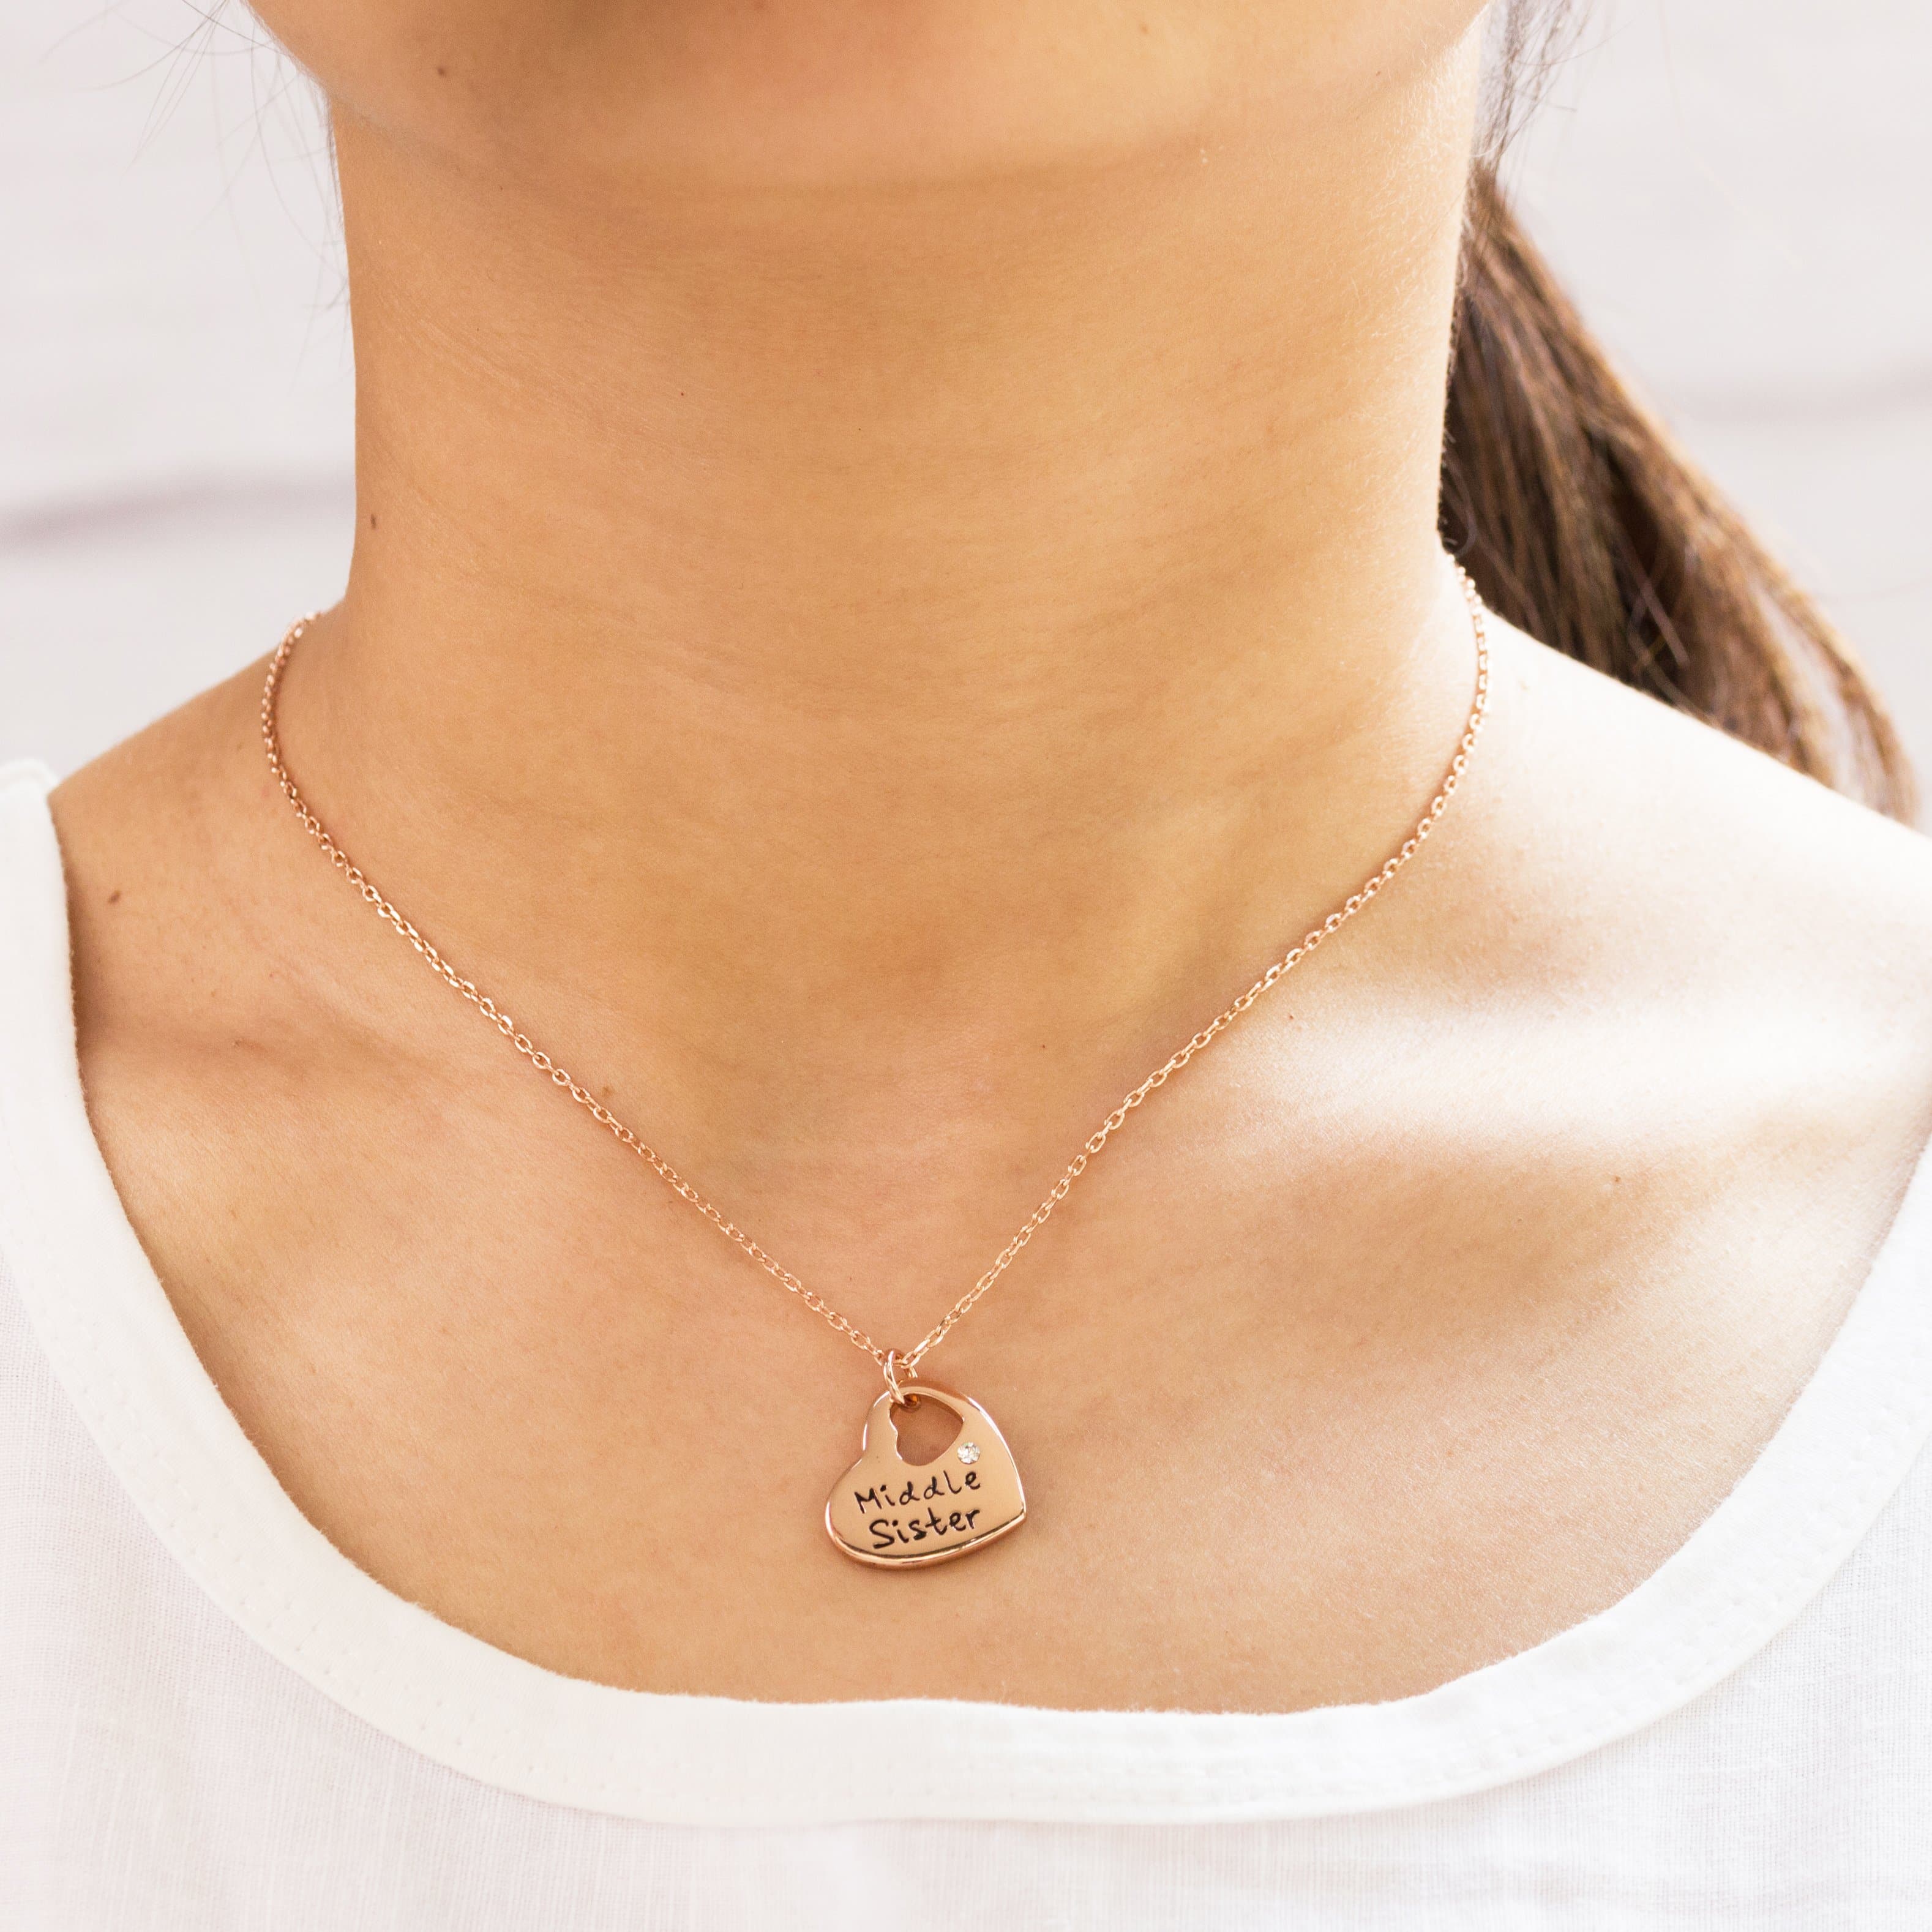 Rose Gold Plated Middle Sister Heart Necklace Created with Zircondia® Crystals